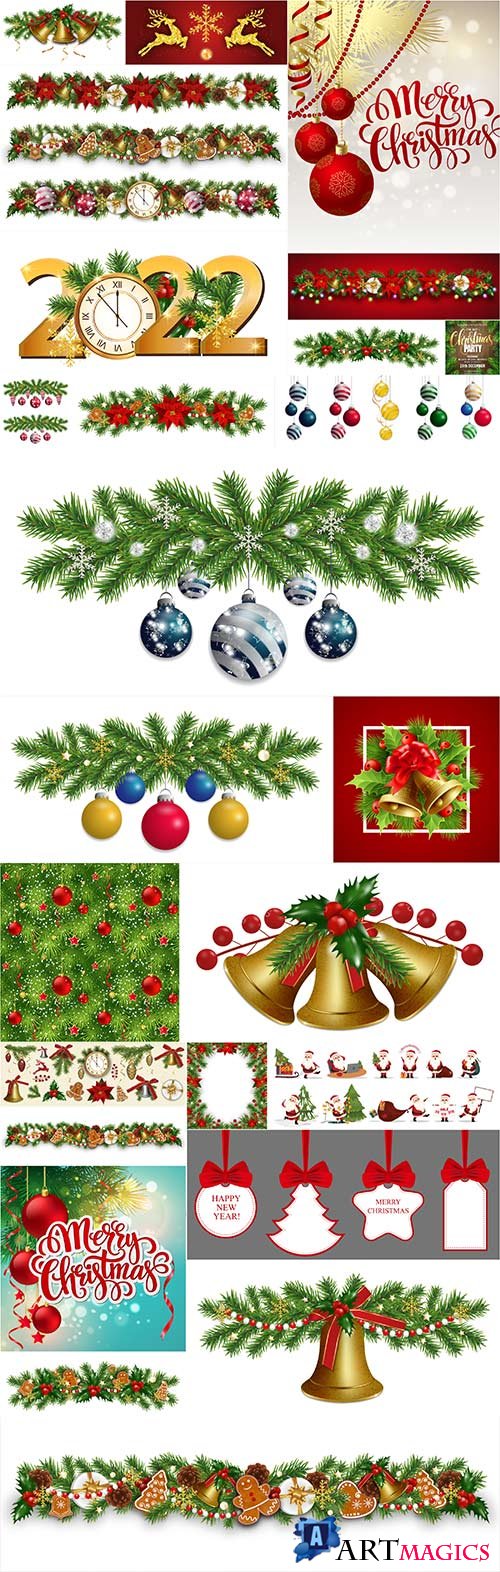 Christmas border decoration with baubles new year garland with christmas tree branches and balls